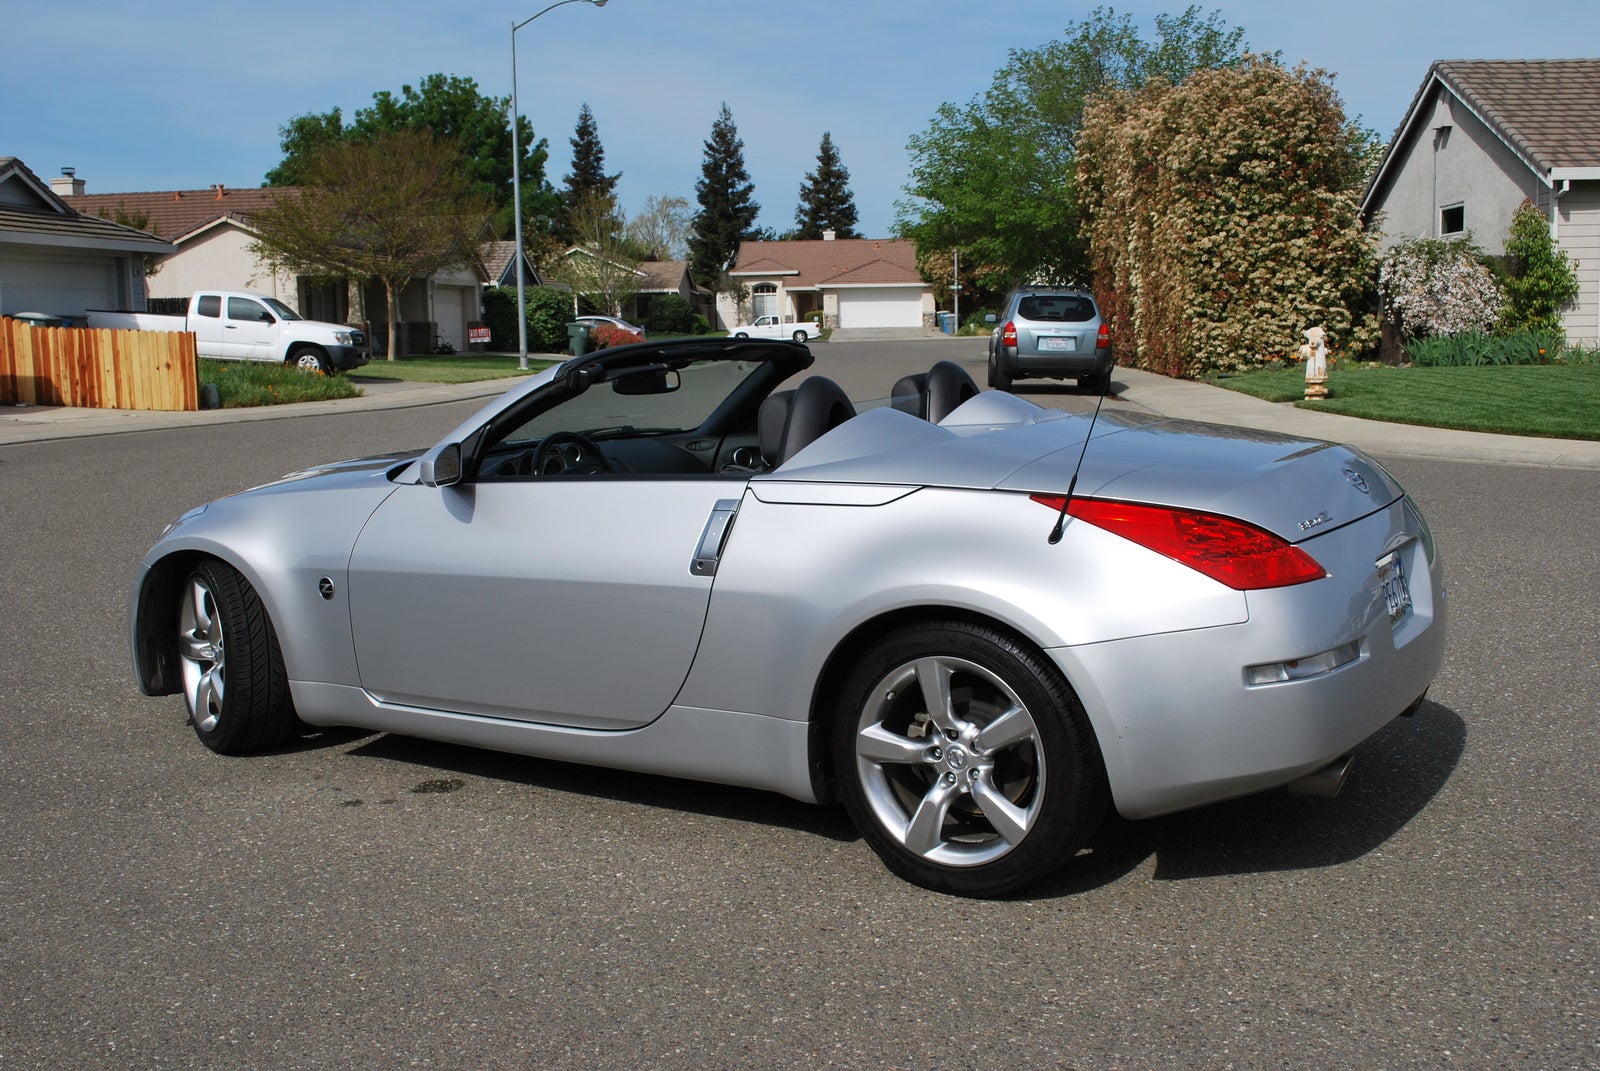 Nissan 350Z 2008 Convertible Roadster Grand Touring. 